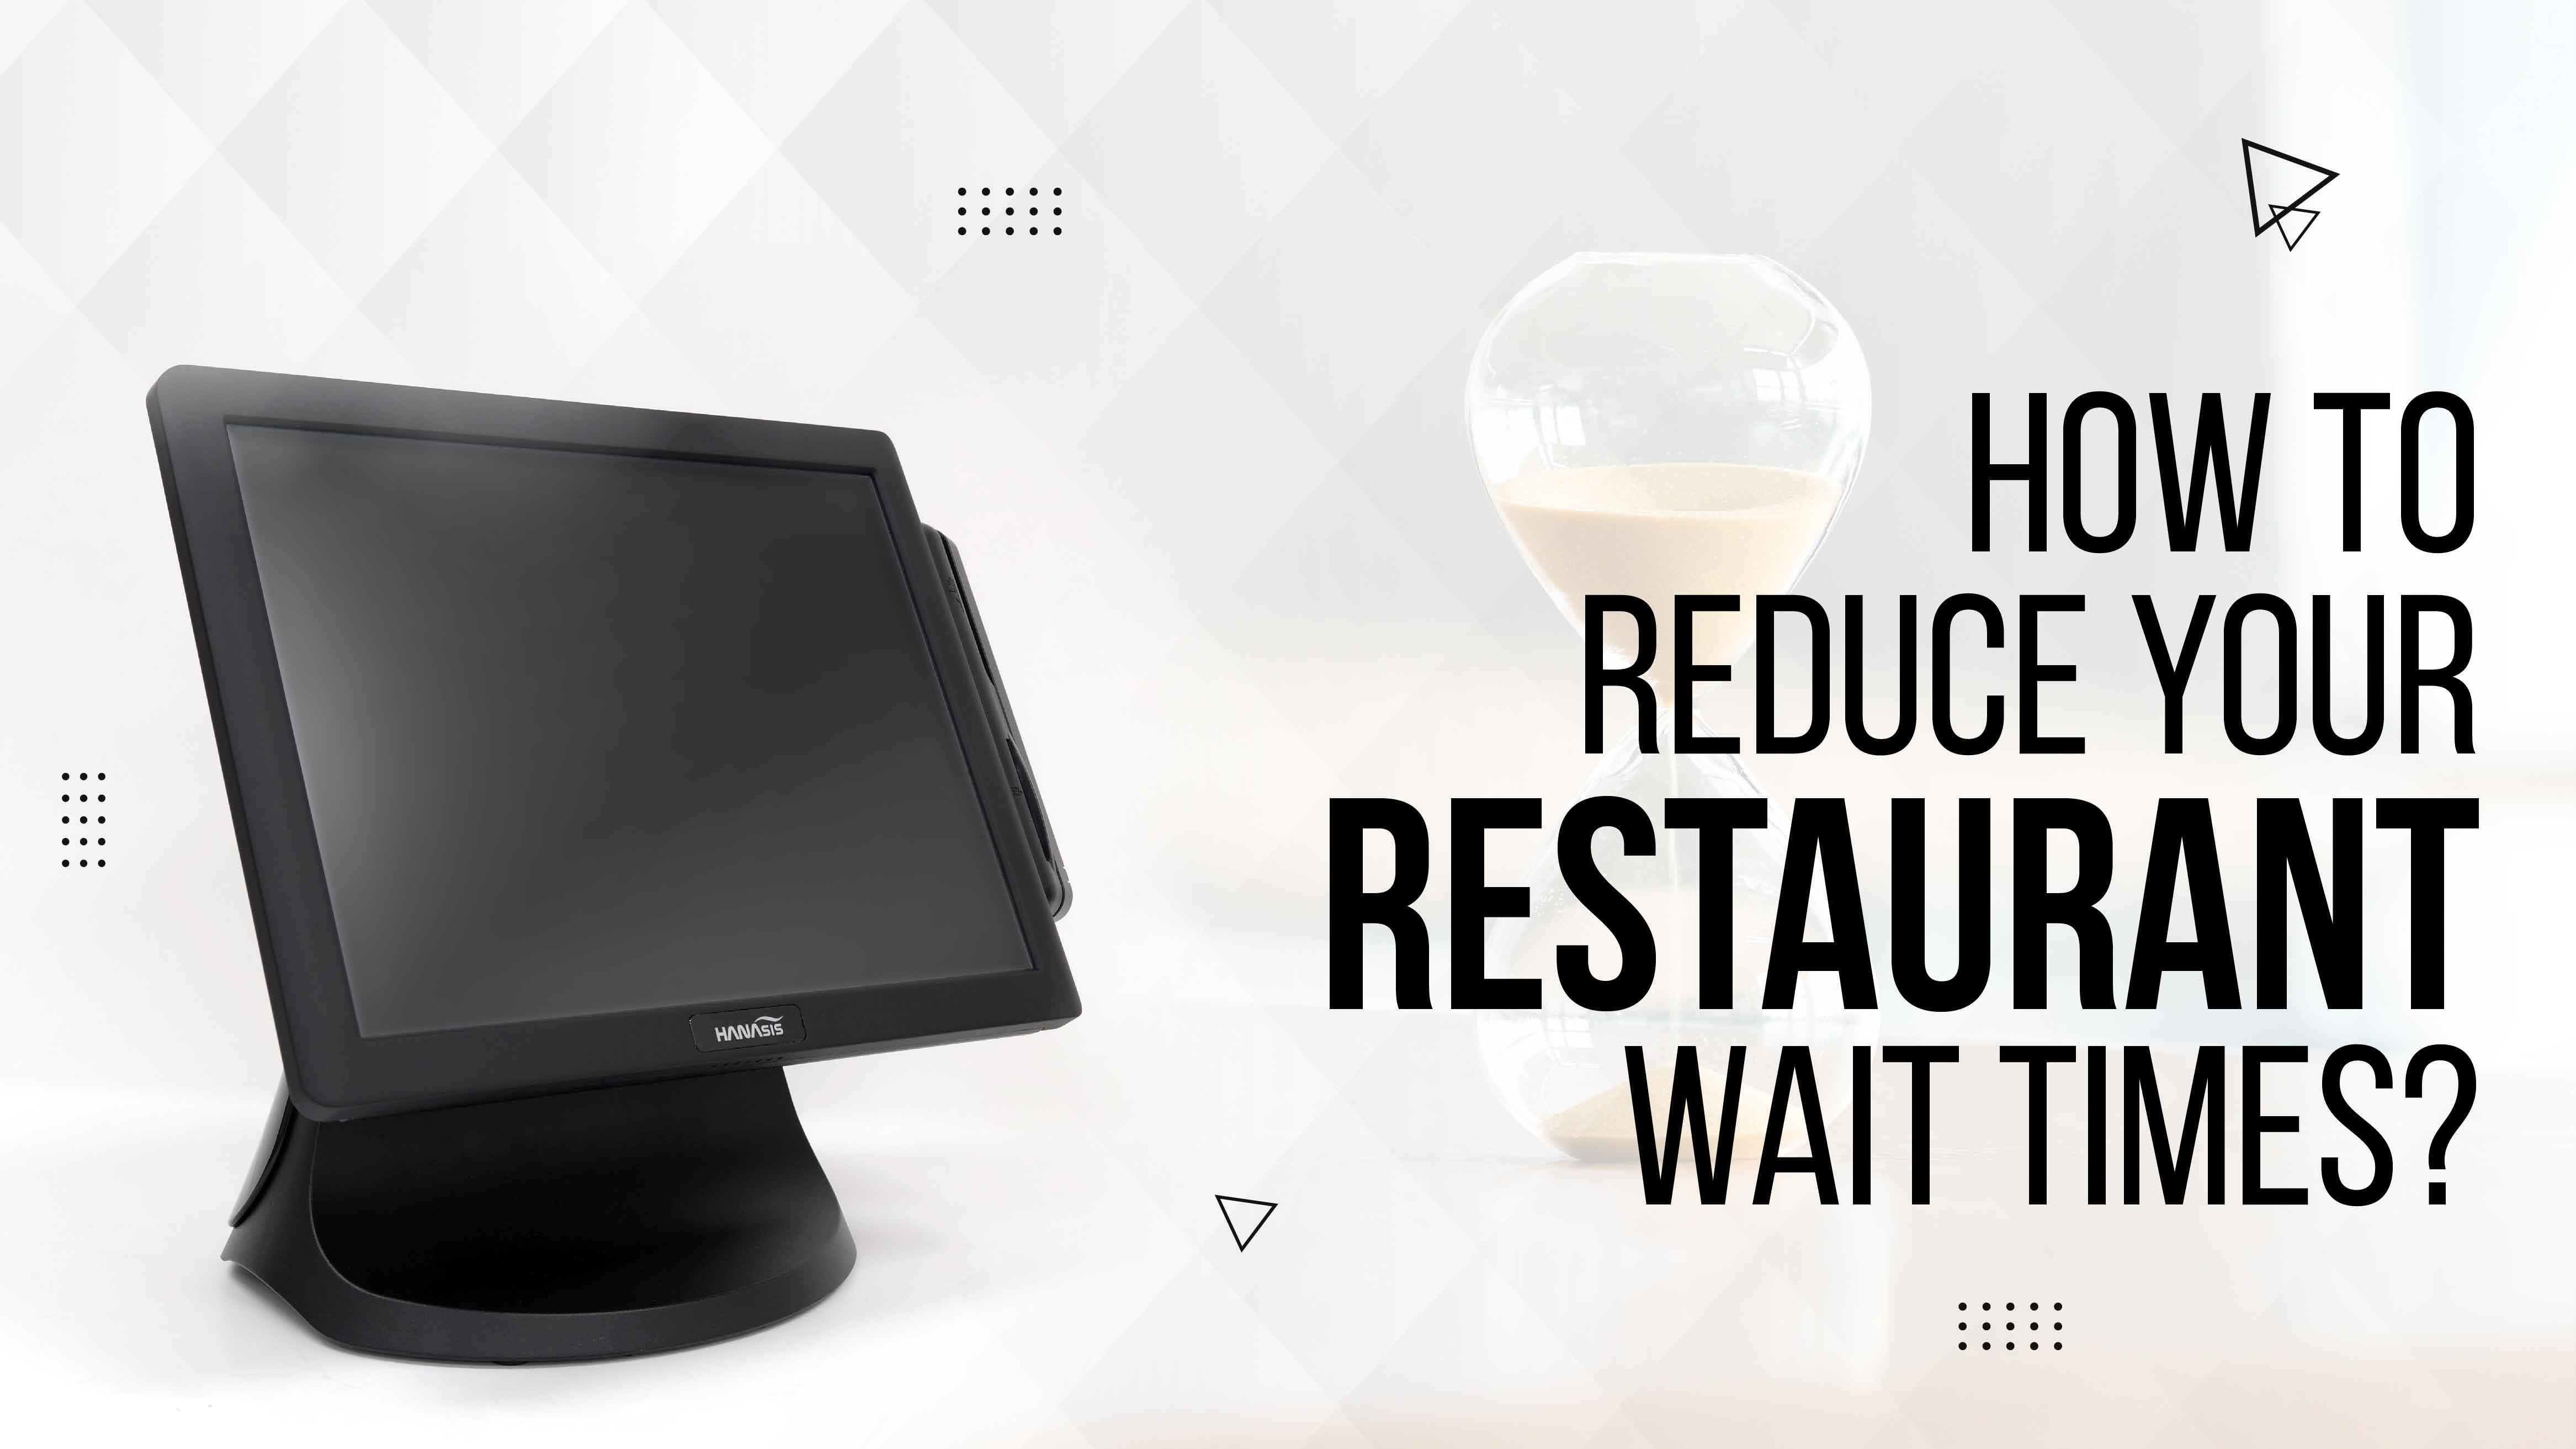 How to reduce your restaurant wait times?